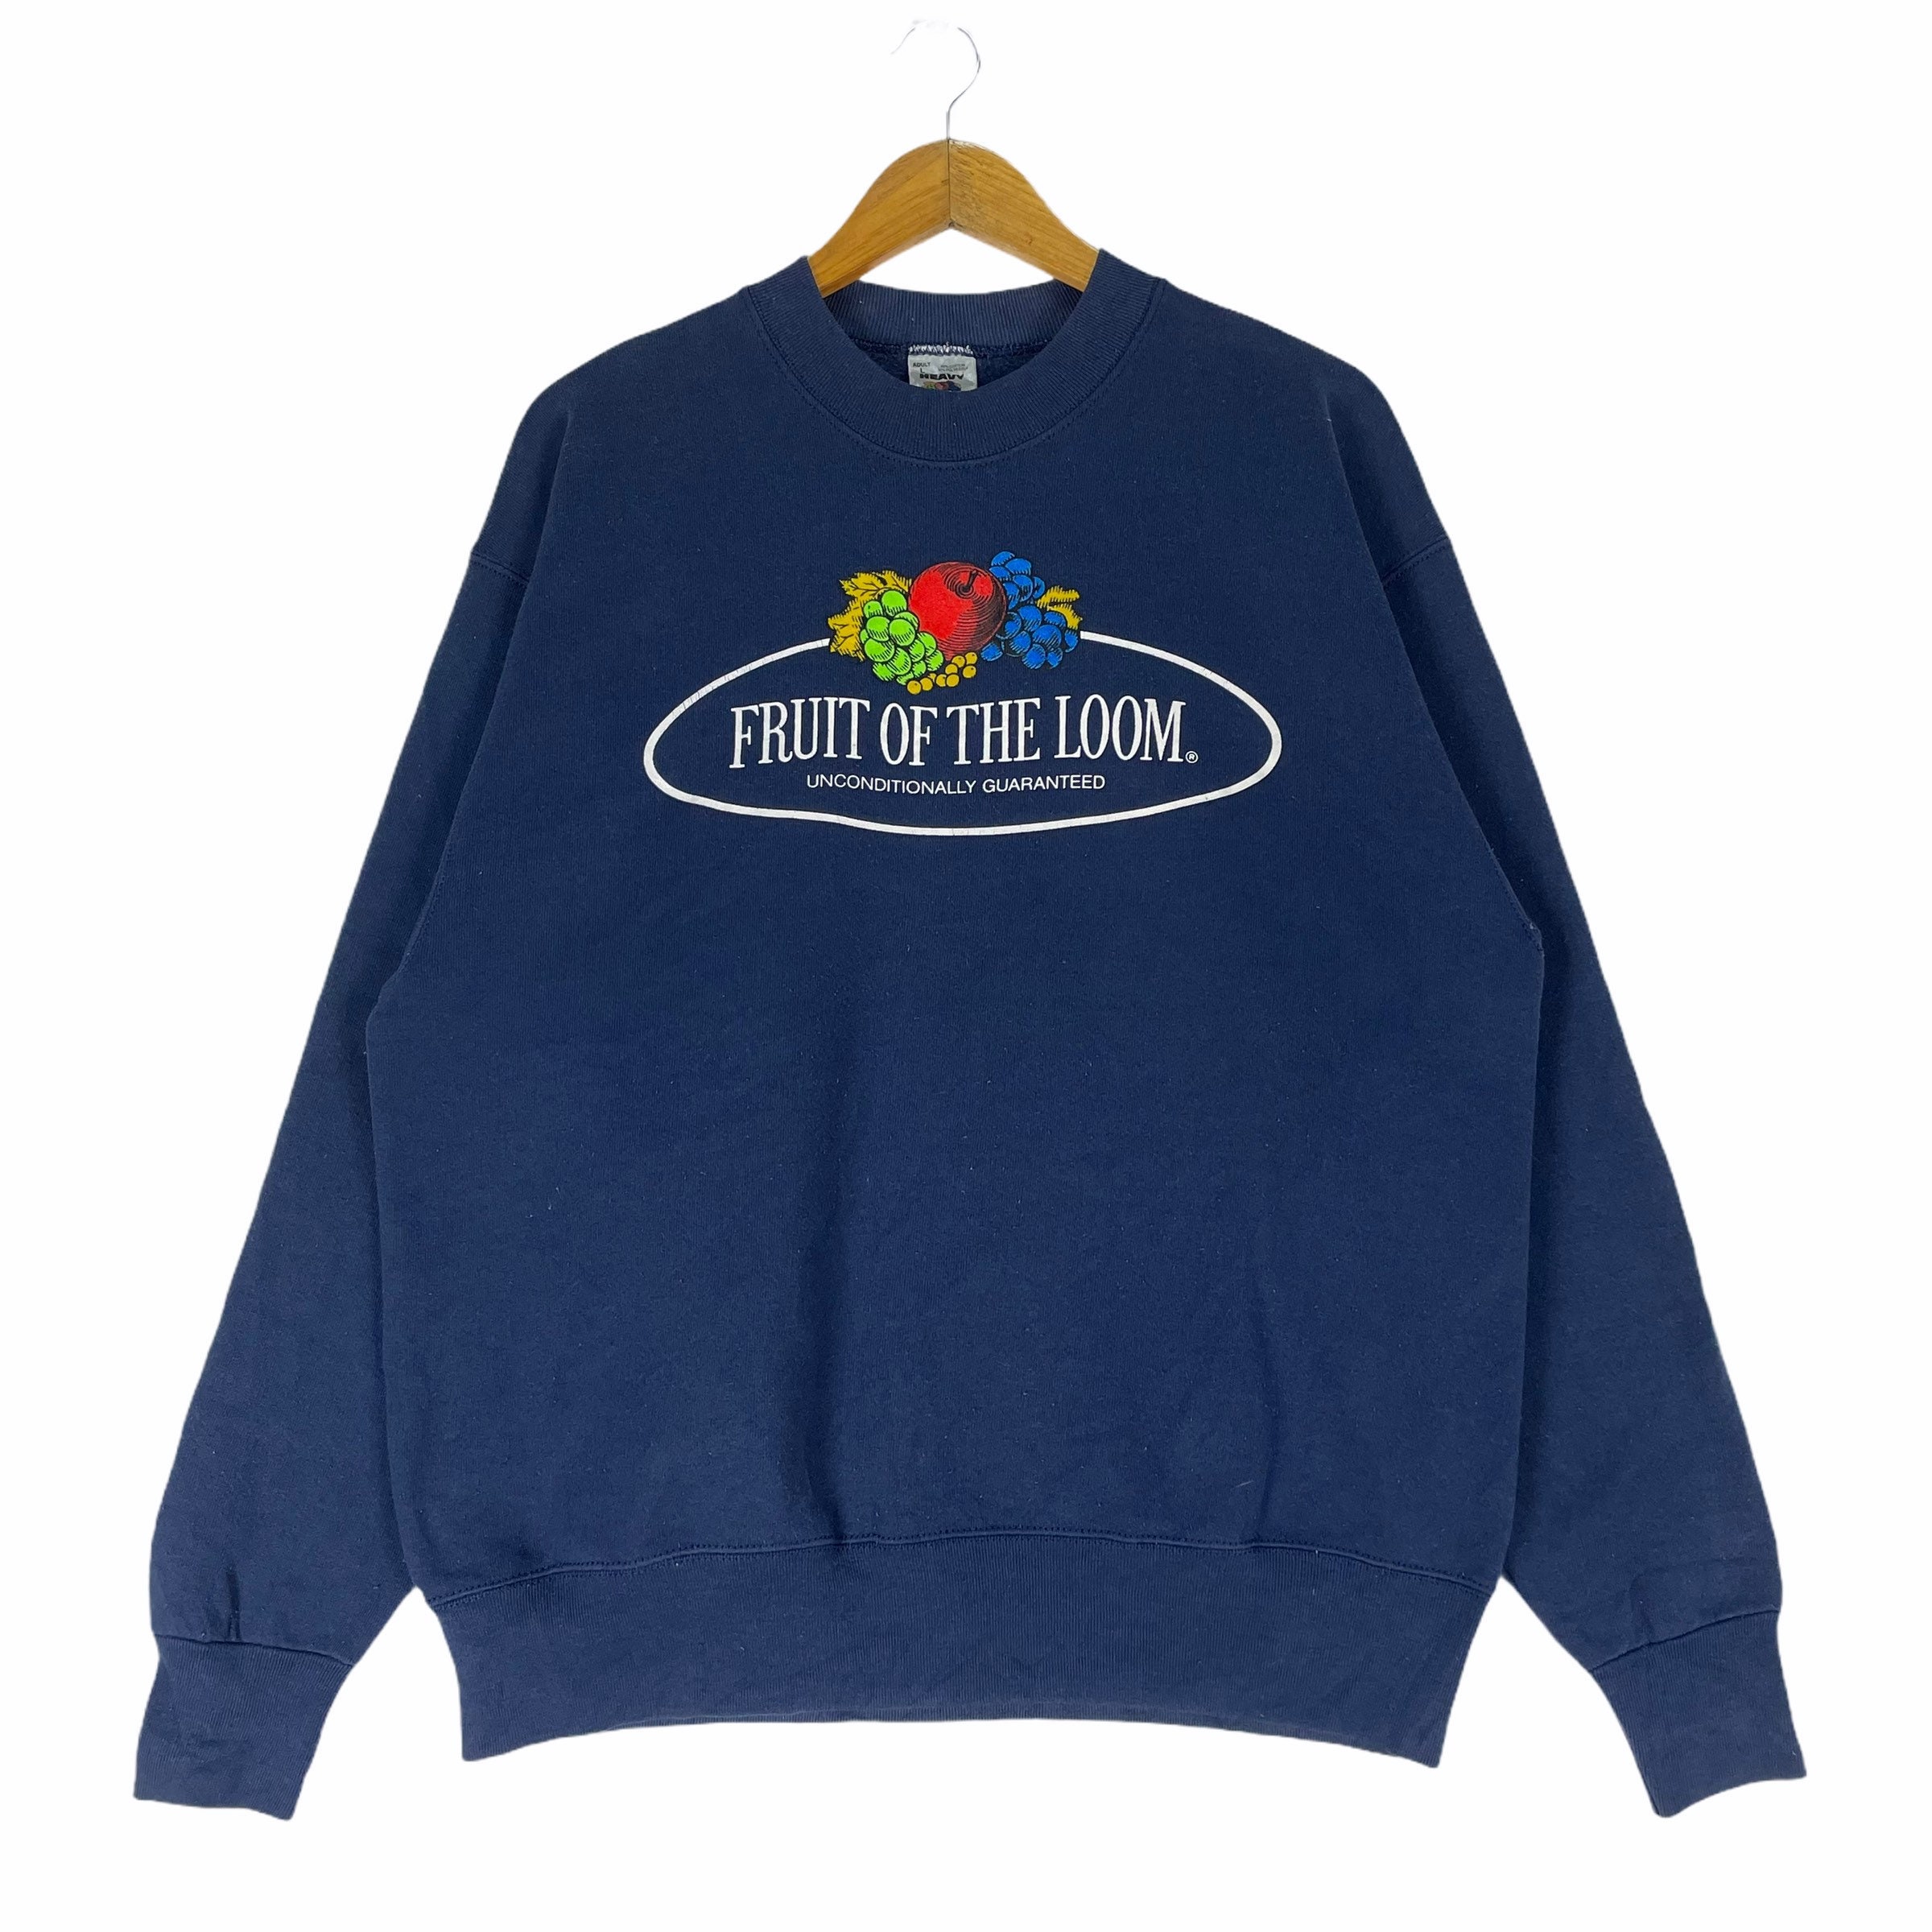 Vintage 90s Fruit of the Loom Sweatshirt Crewneck Sportswear Navy Blue  Colour Clothing Pullover Size Large - Etsy